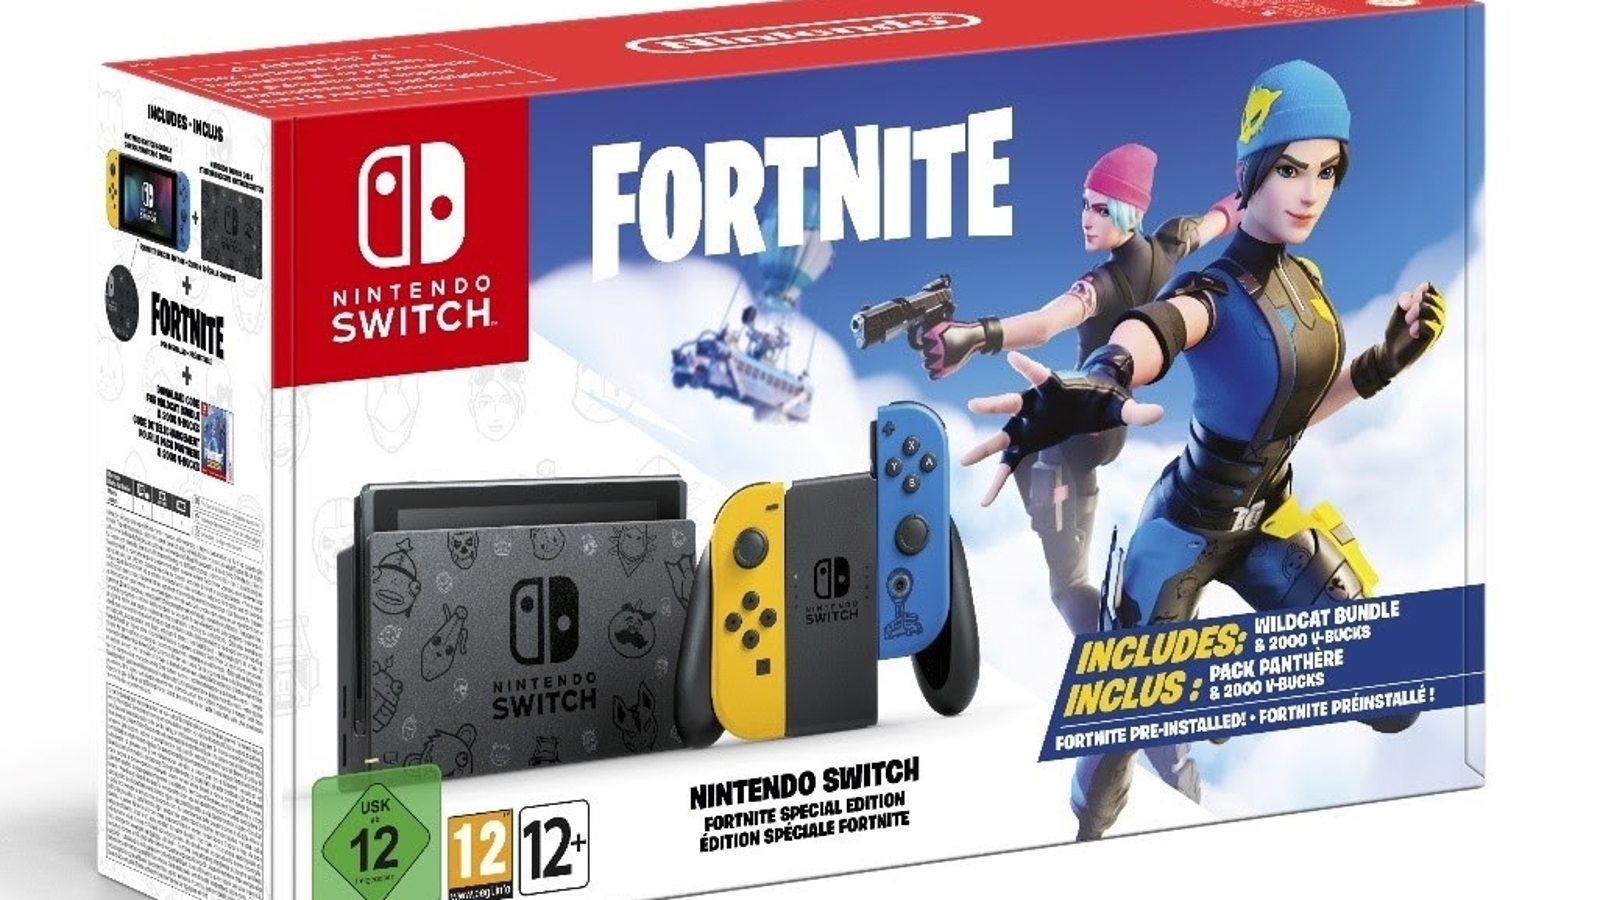 There's an official Fortnite Switch console | Eurogamer.net